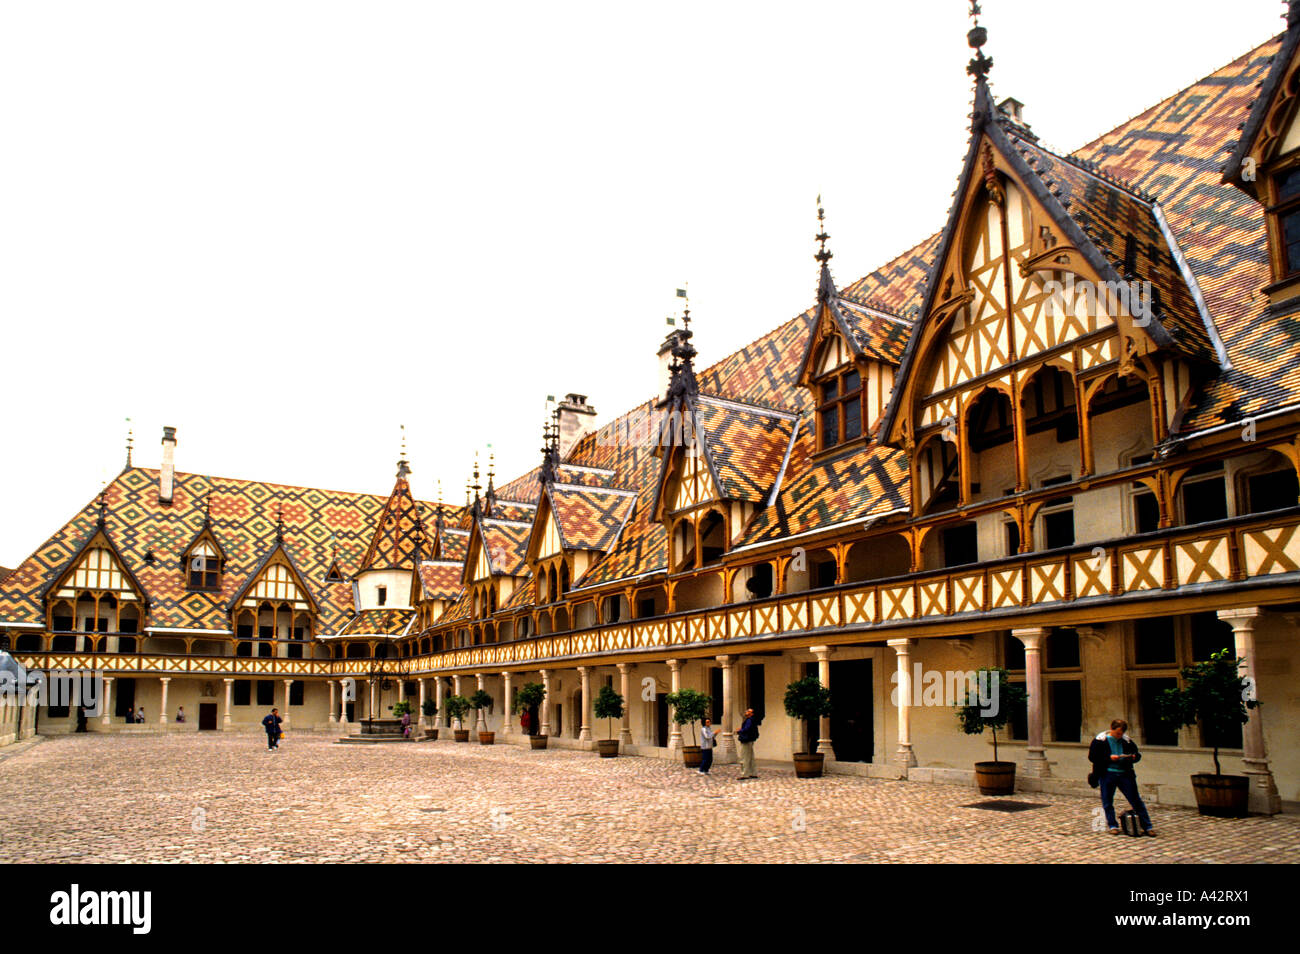 The Hotel Dieu hospital Beaune France French museum tiles Stock Photo